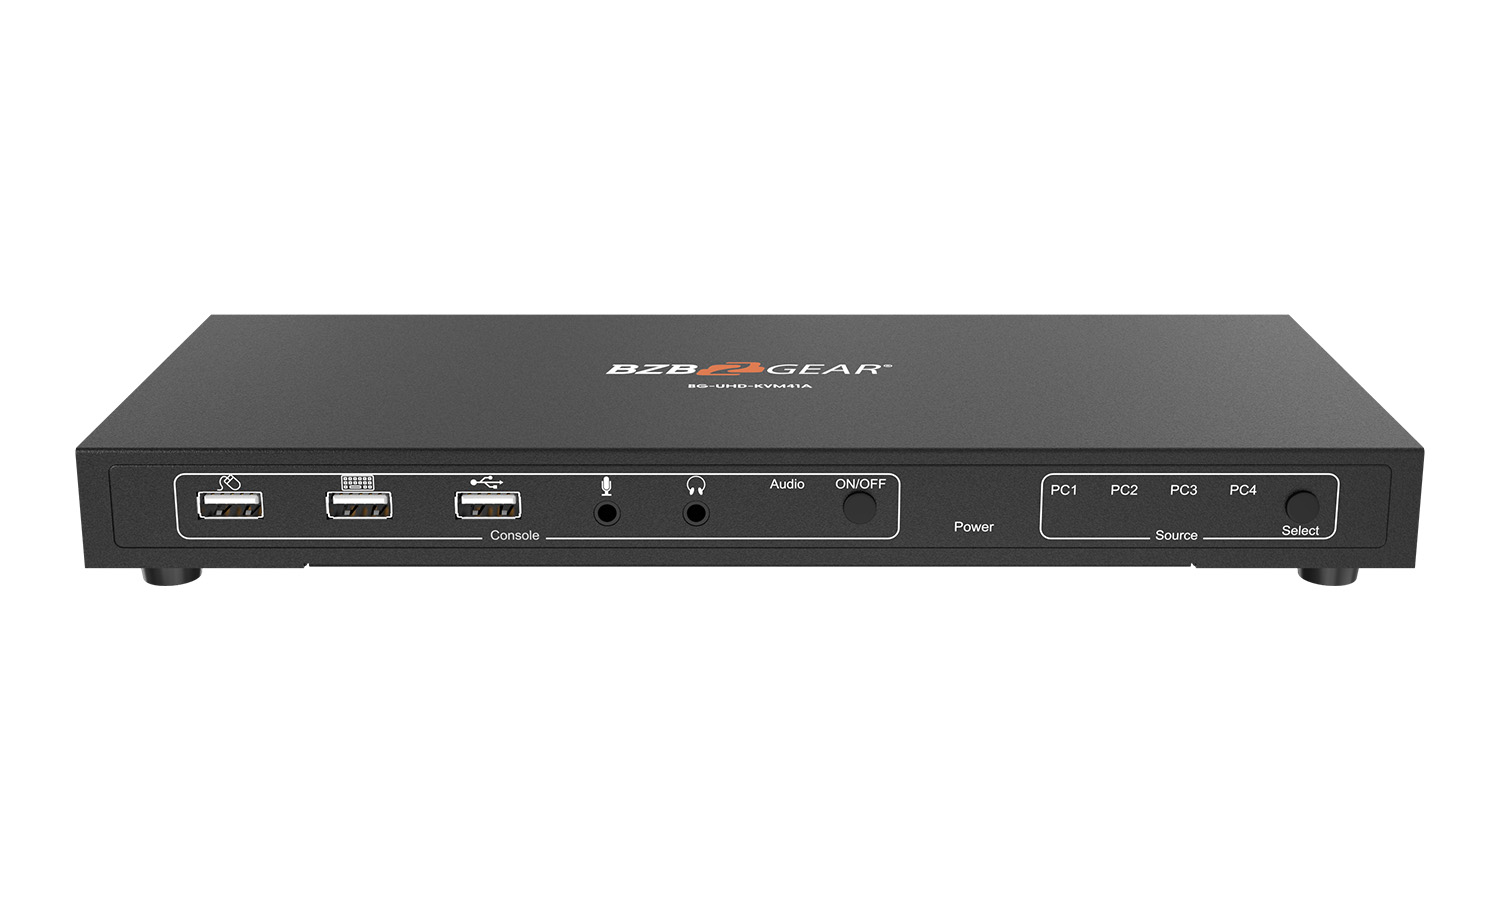 BZBGEAR BG-UHD-KVM41A 4X1 KVM Switch with USB 2.0 Ports for Peripherals and 3.5mm Jacks for Audio Support